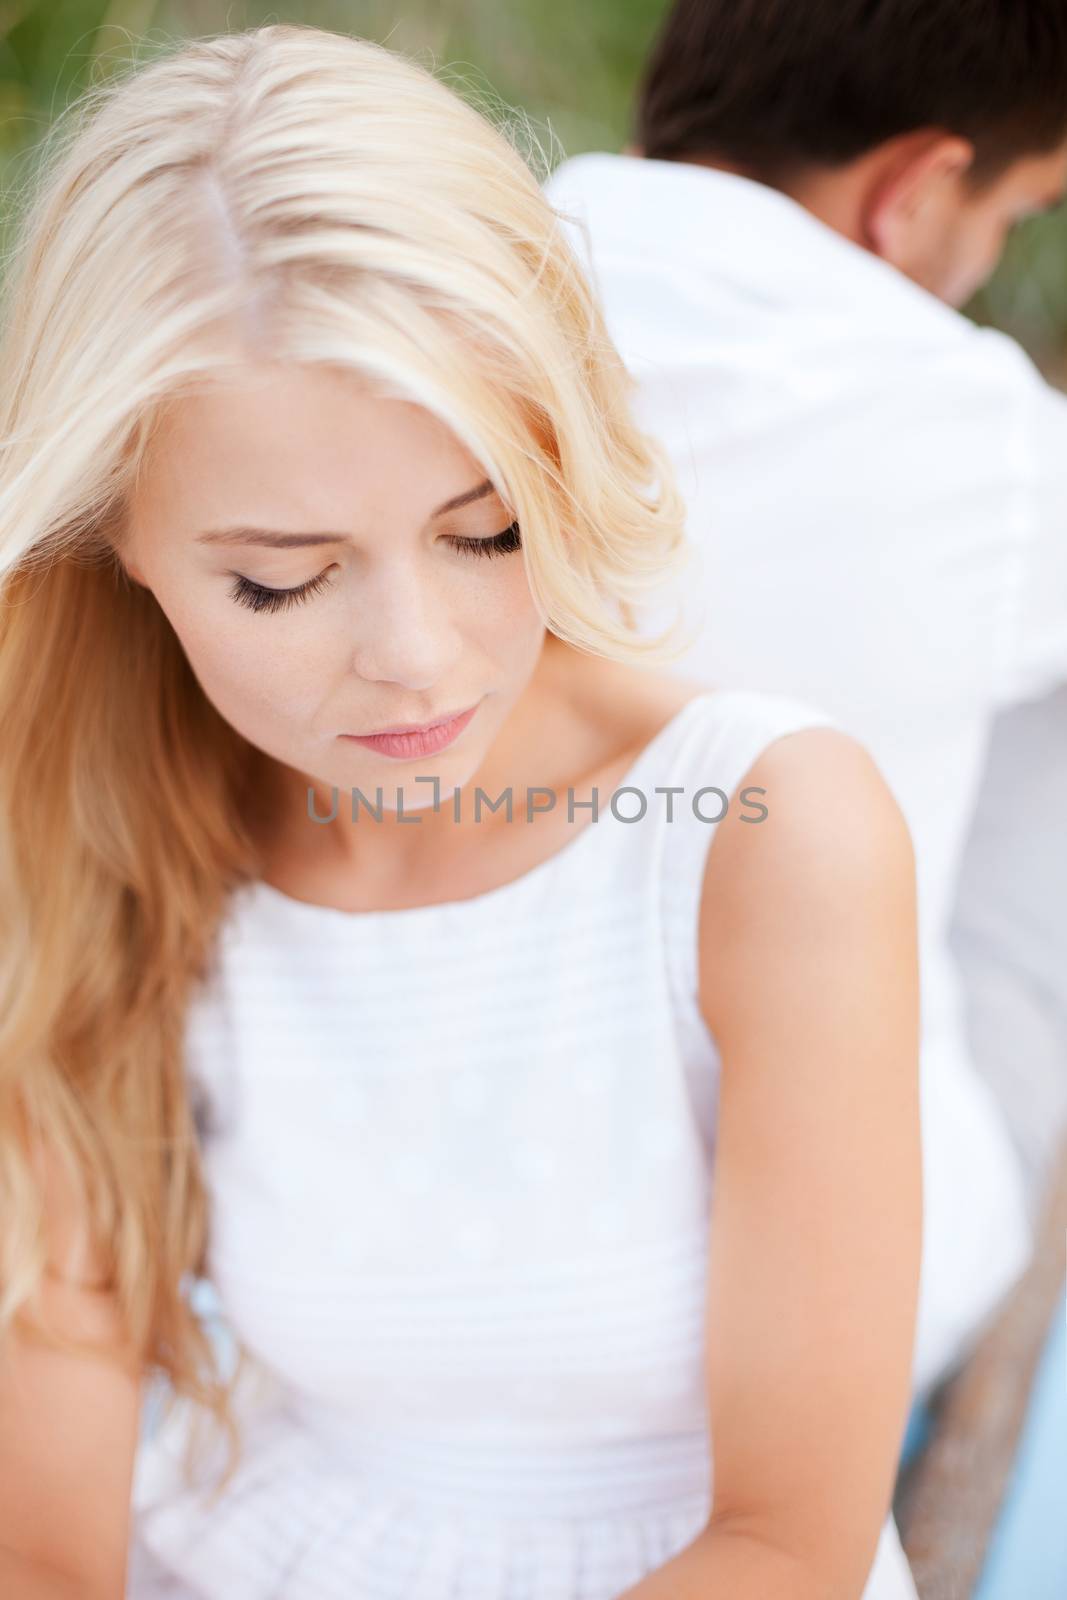 dating and relationships concept - stressed woman with man outside